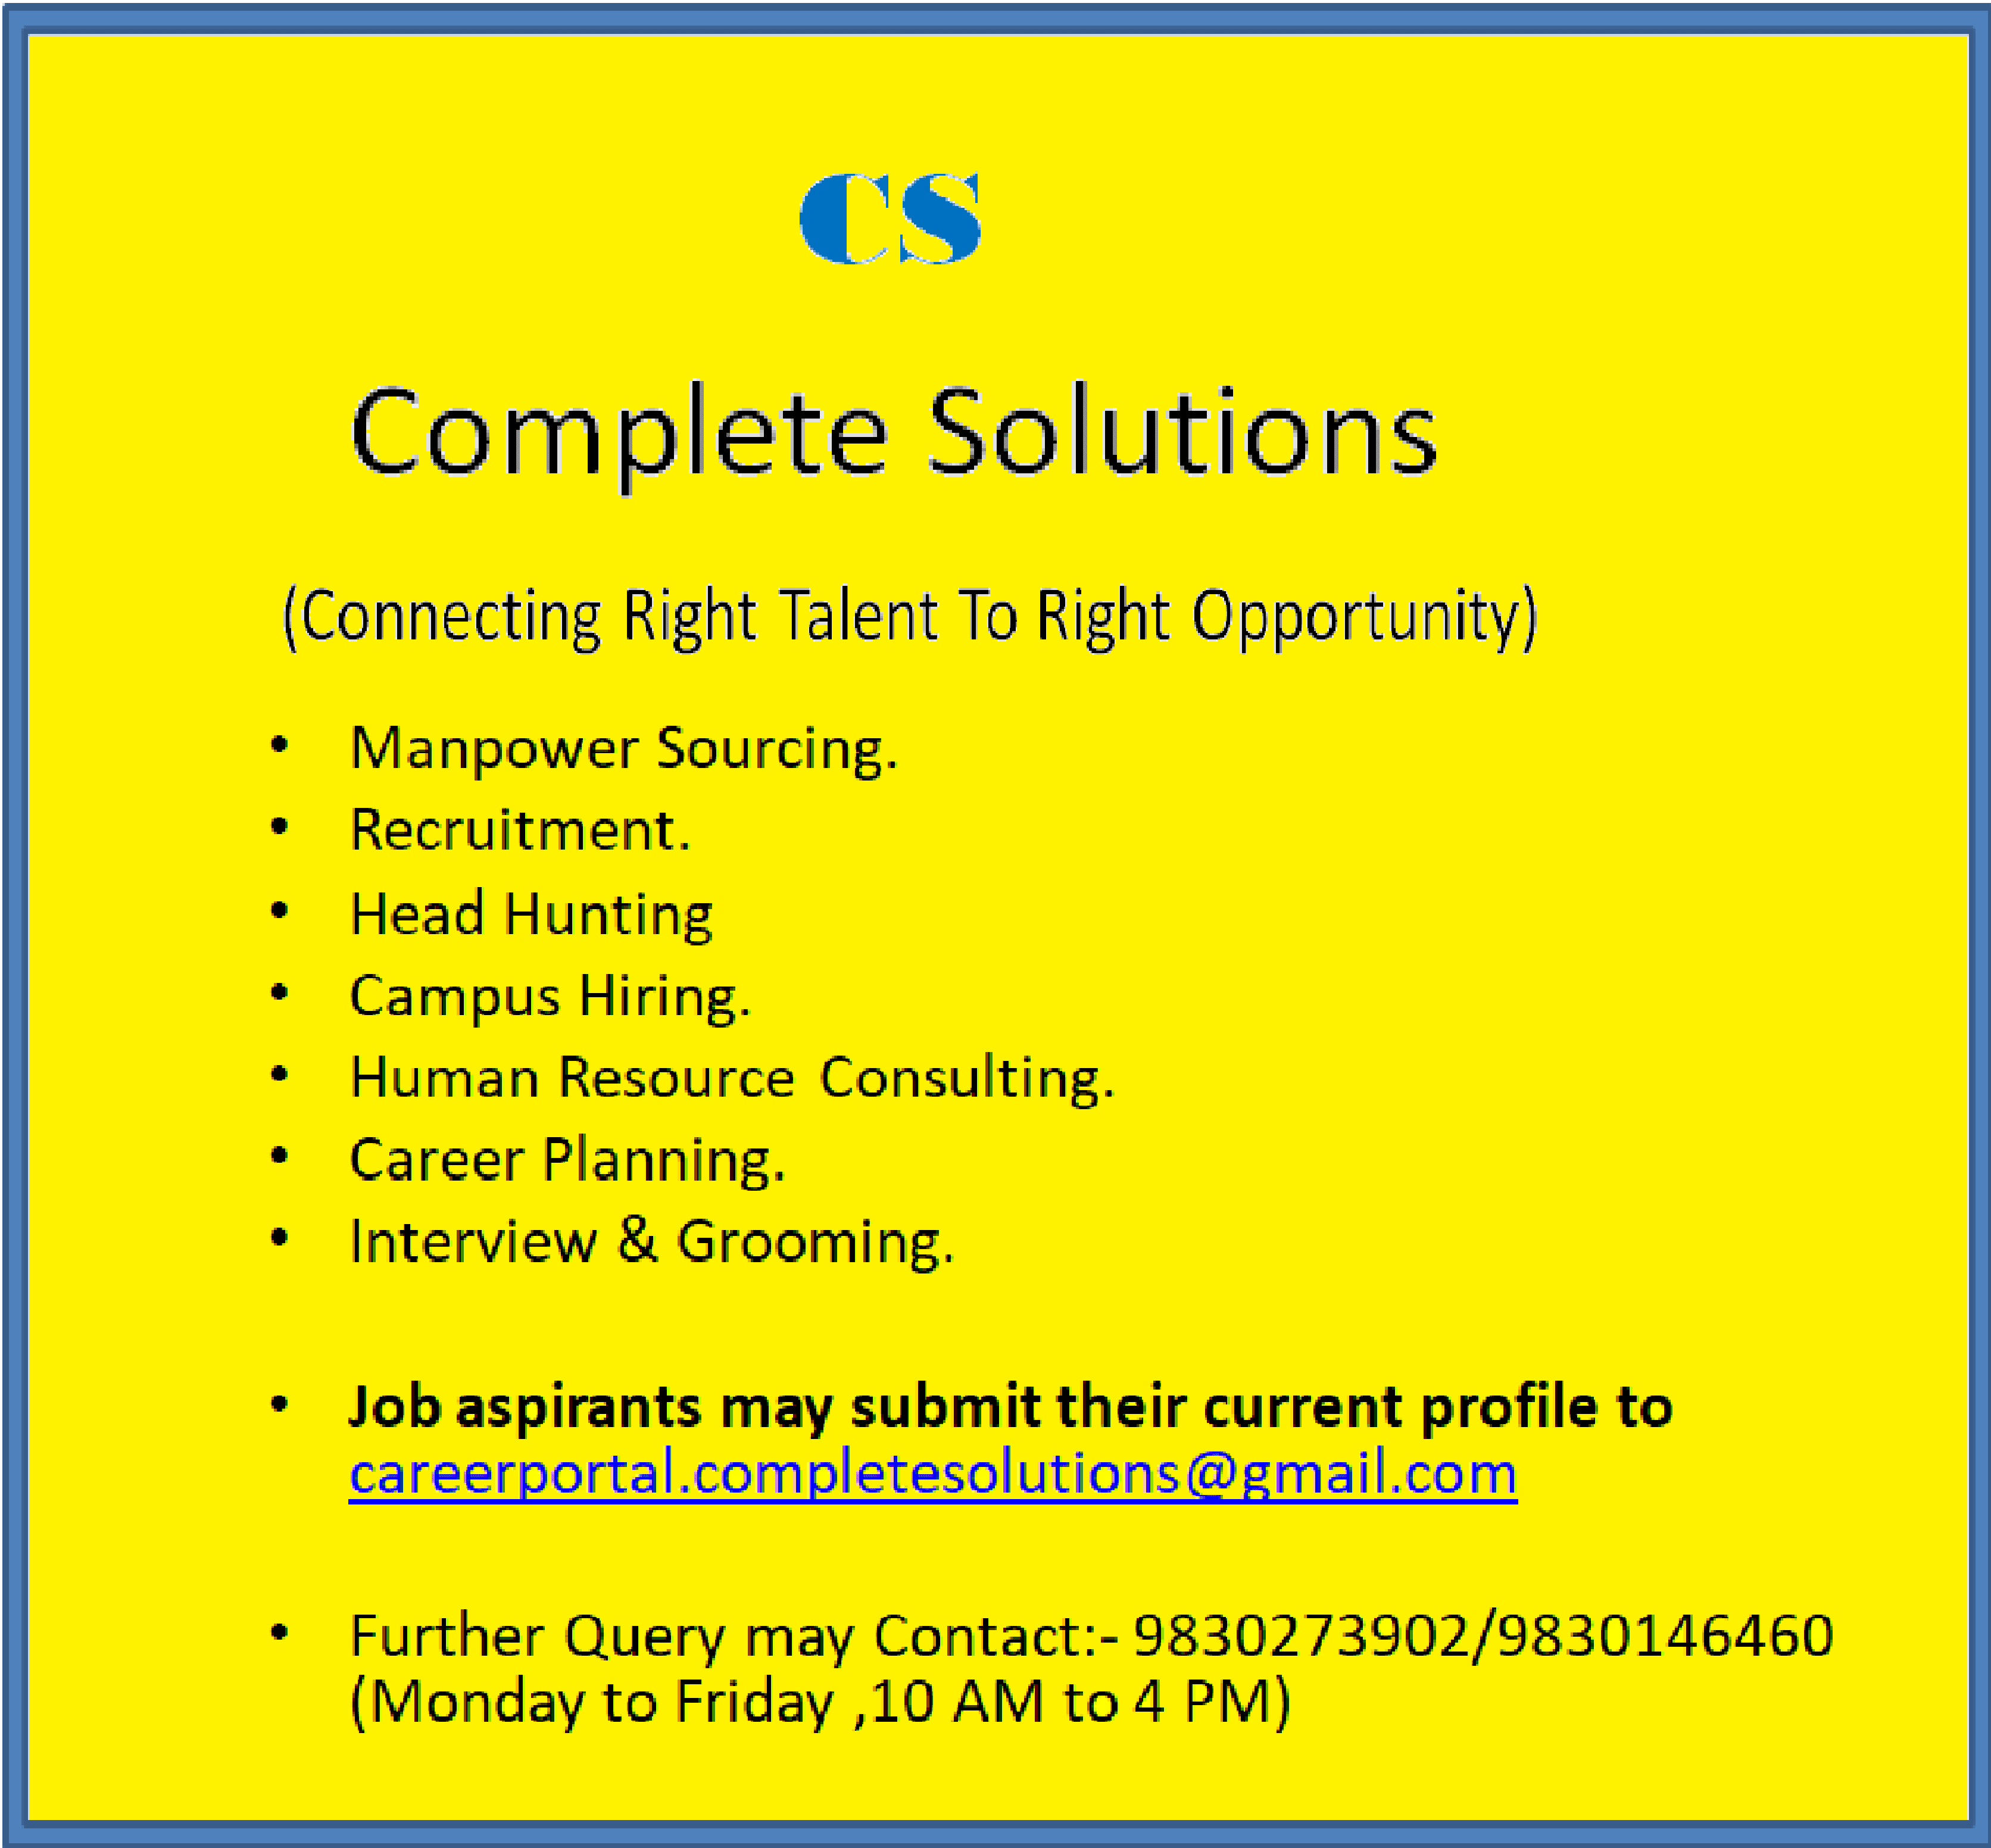 Complete Solutions